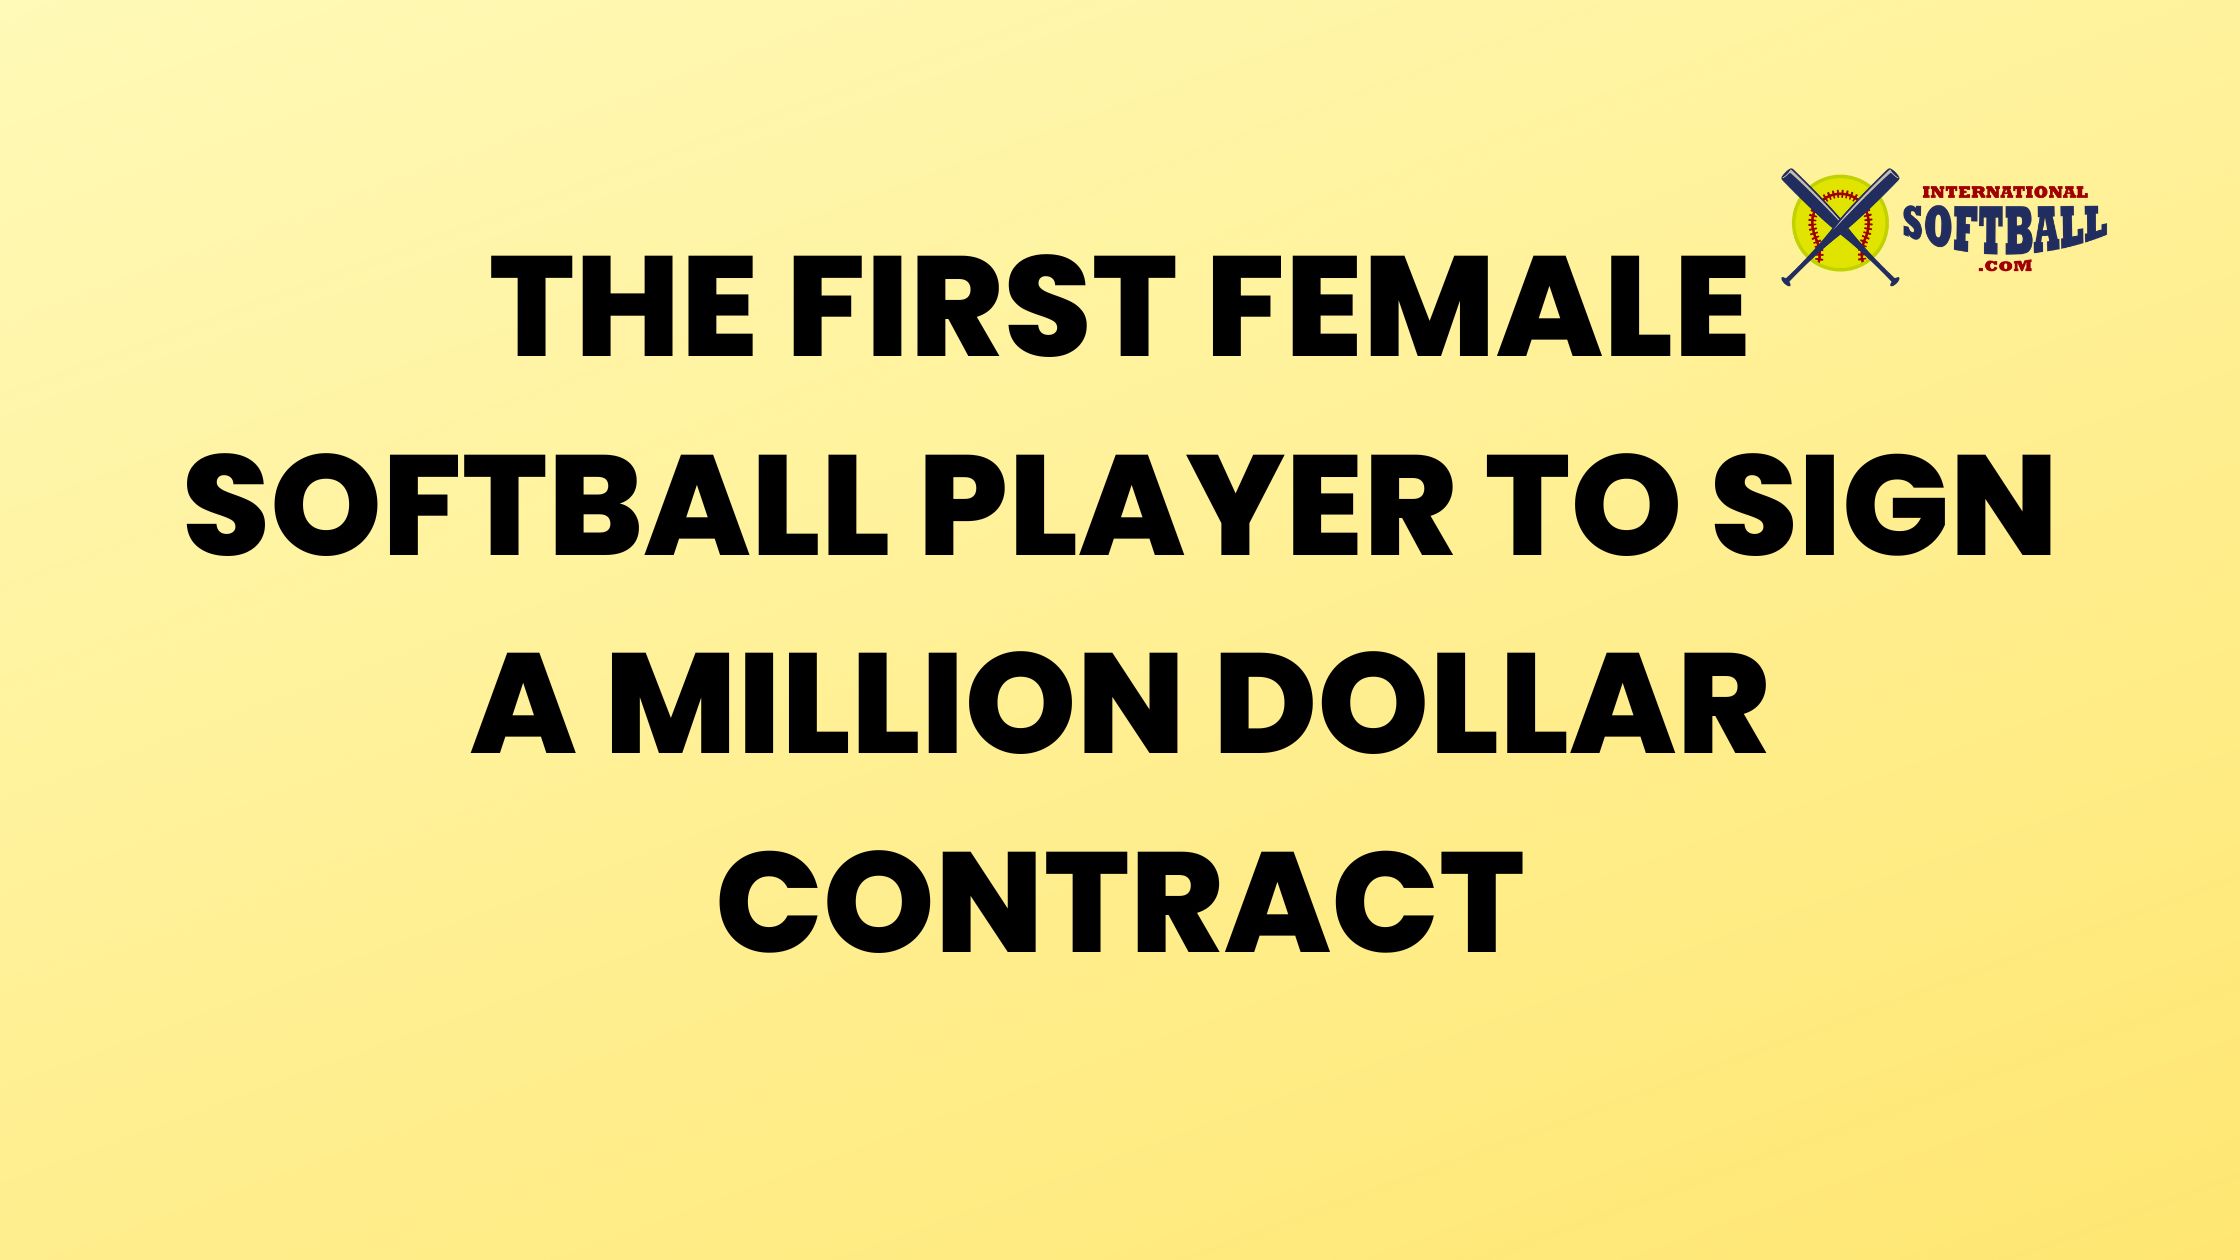 First female to sign million dollar contract